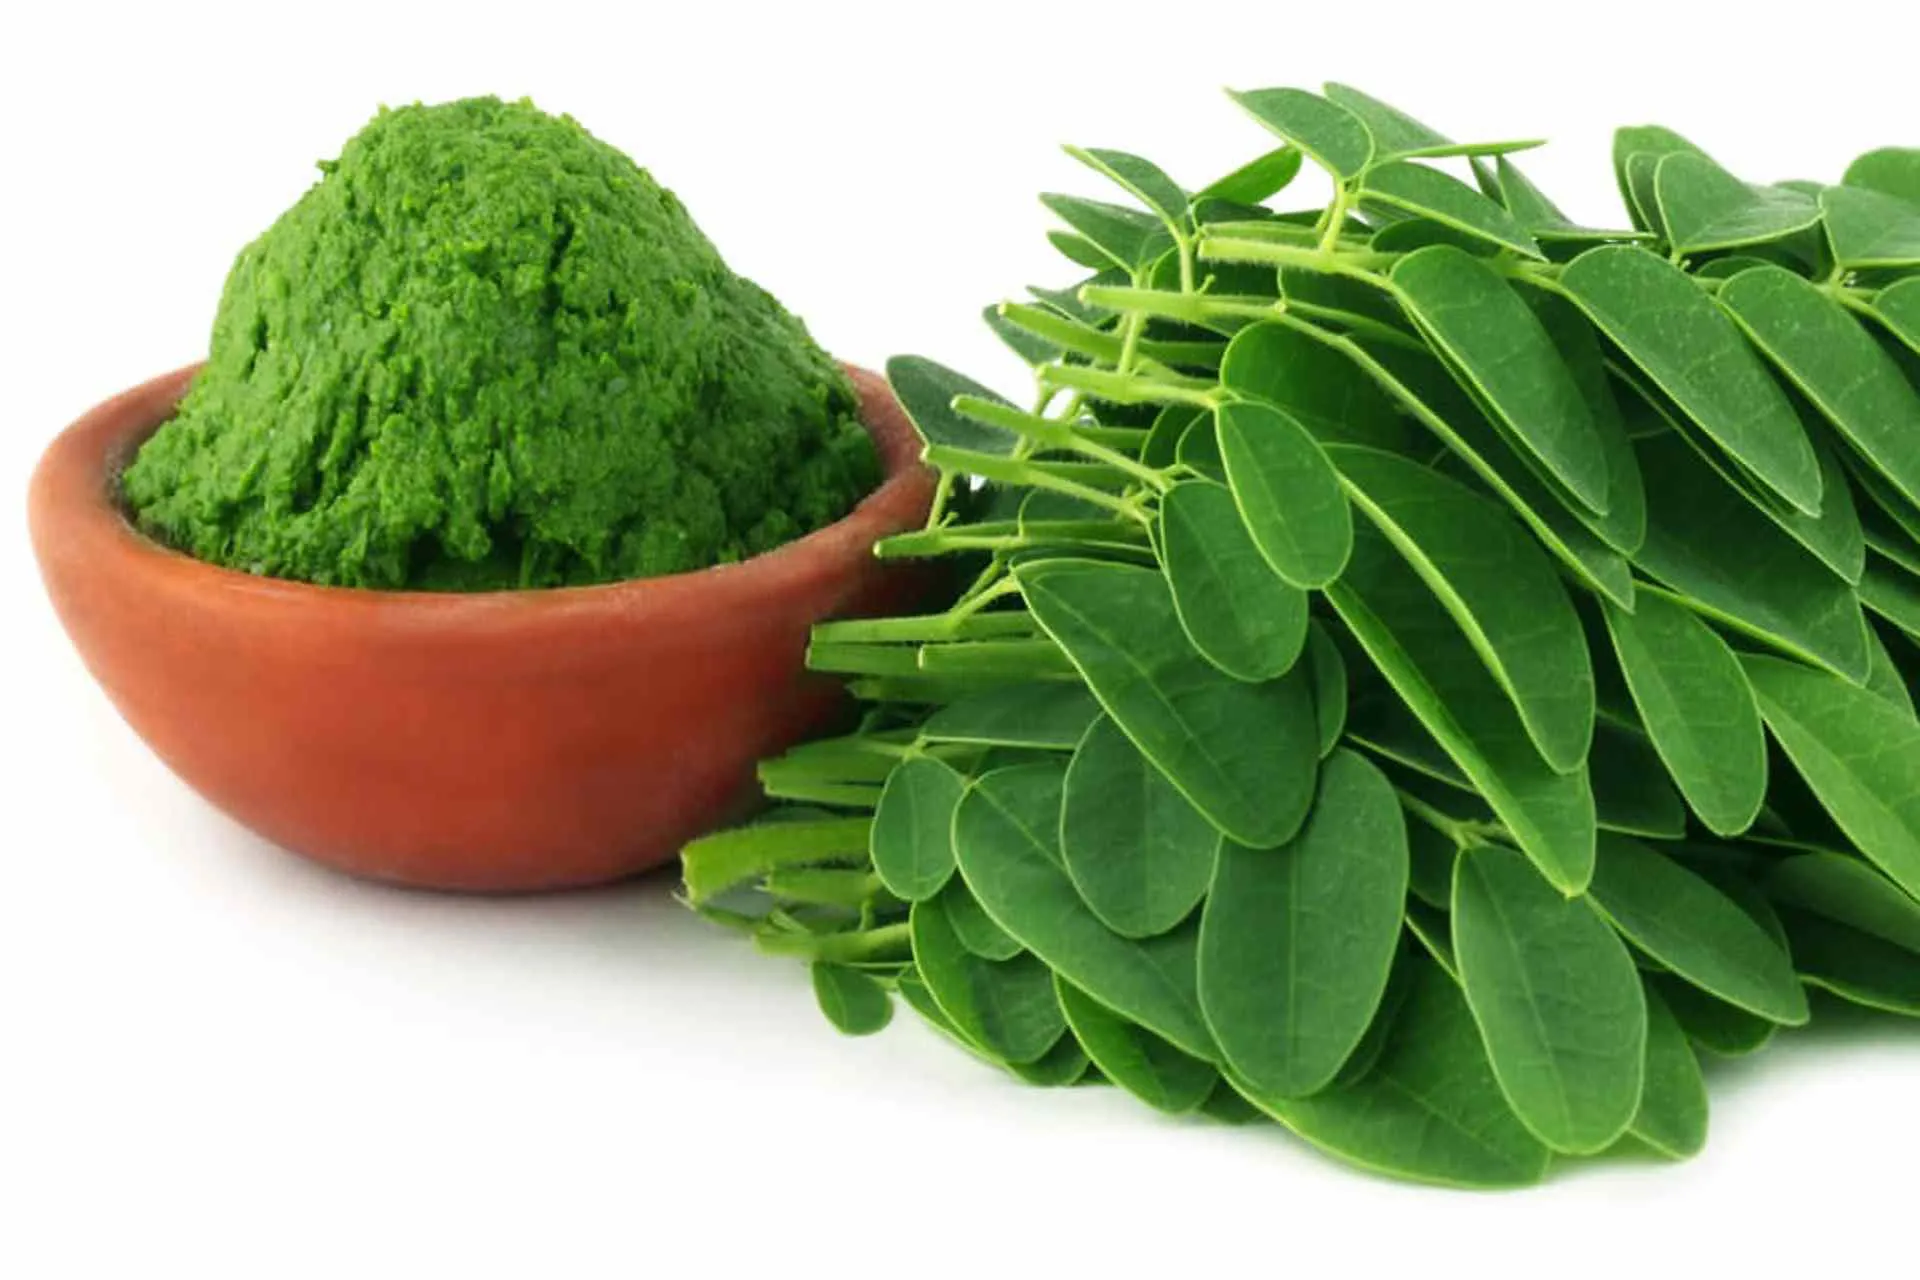 Moringa is available in powder and is consumed raw added to salads and shakes.